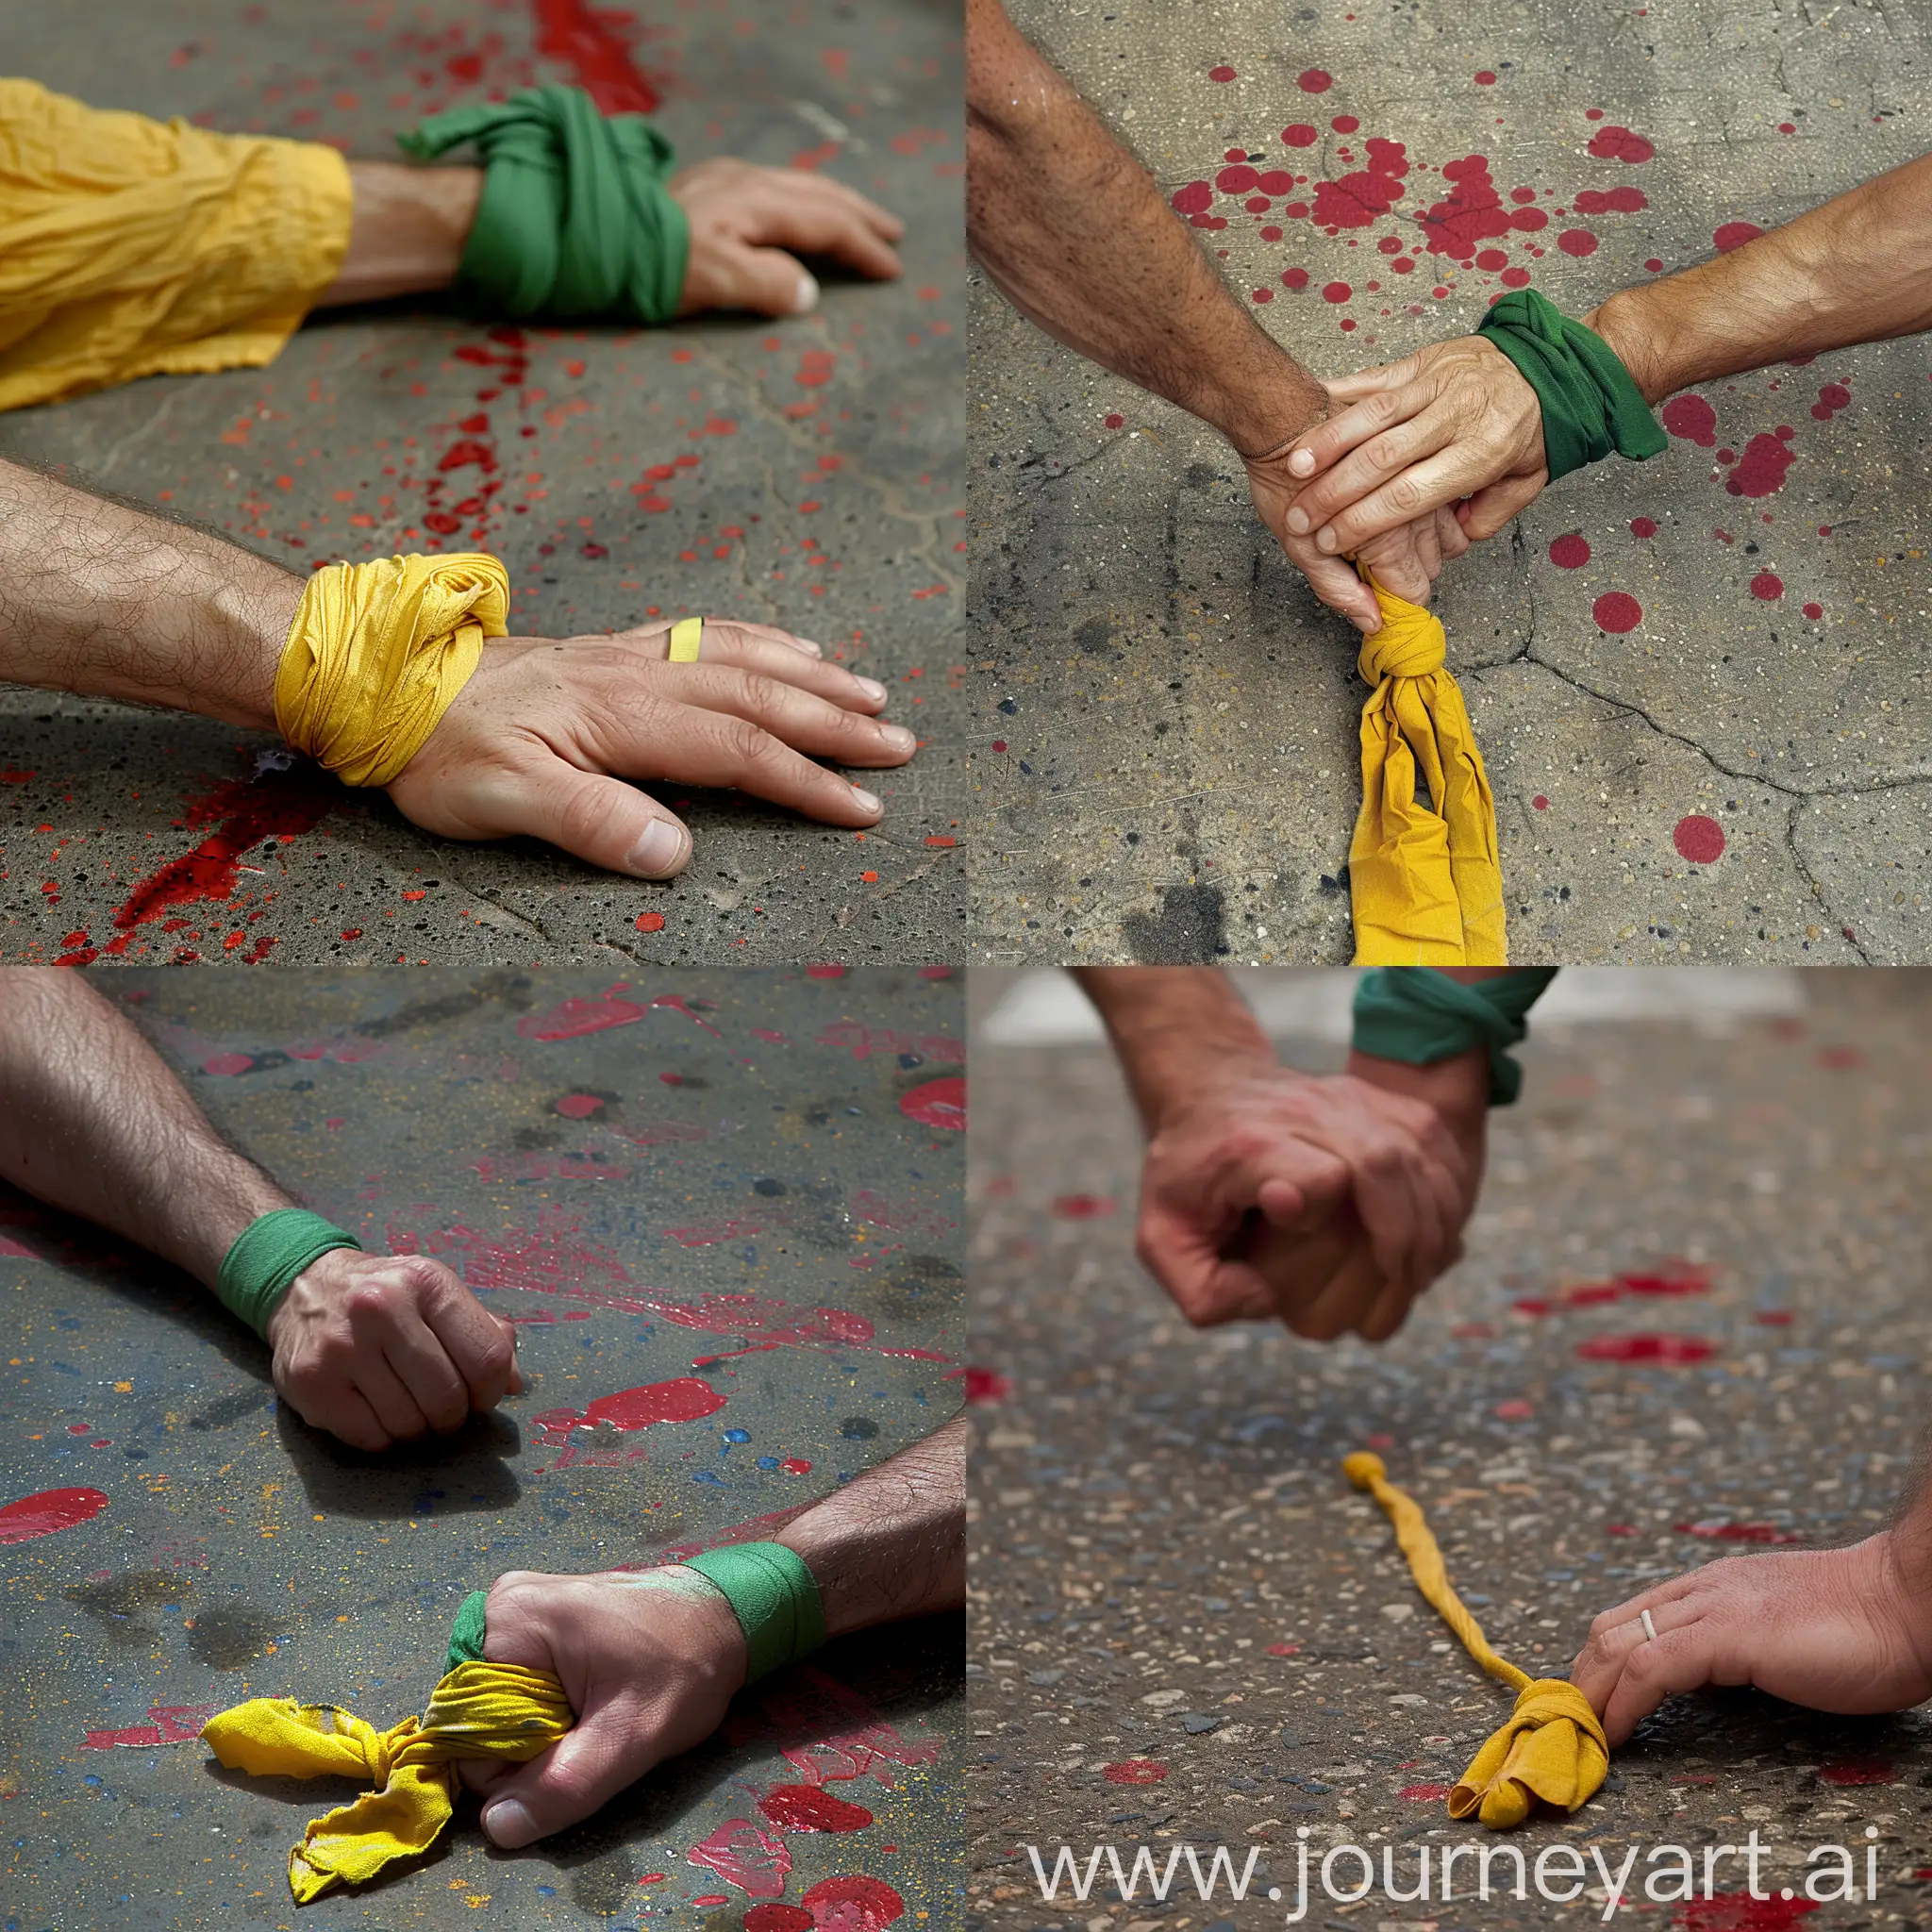 Two-Mens-Hands-with-Colorful-Cloth-Bands-on-Asbestos-Floor-with-Red-Spots